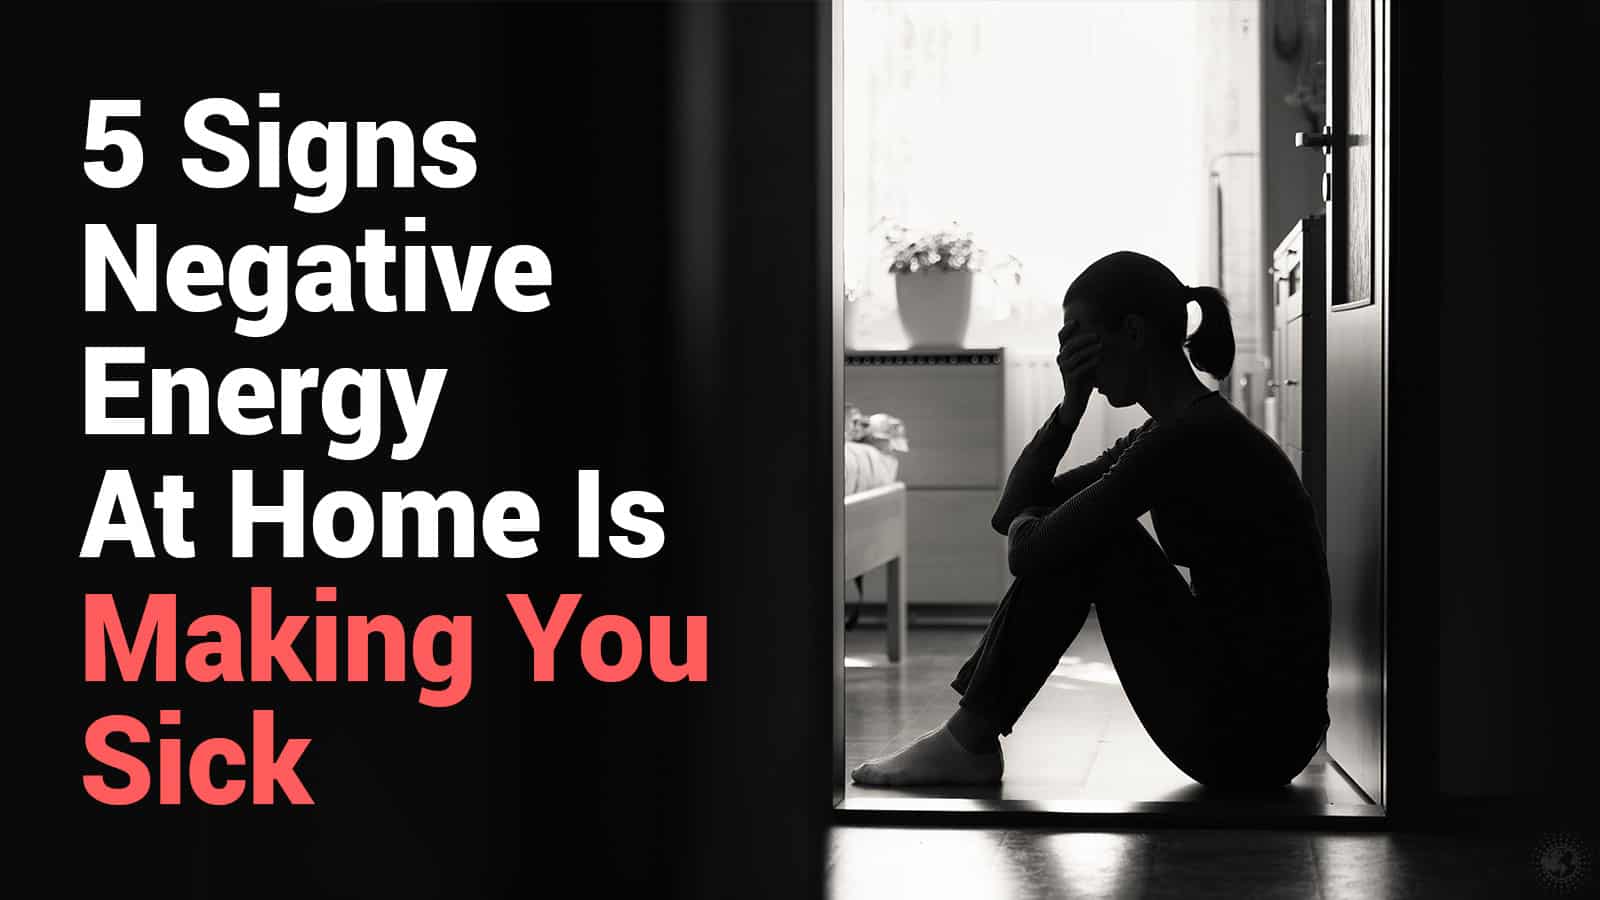 5 Signs Negative Energy At Home Is Making You Sick